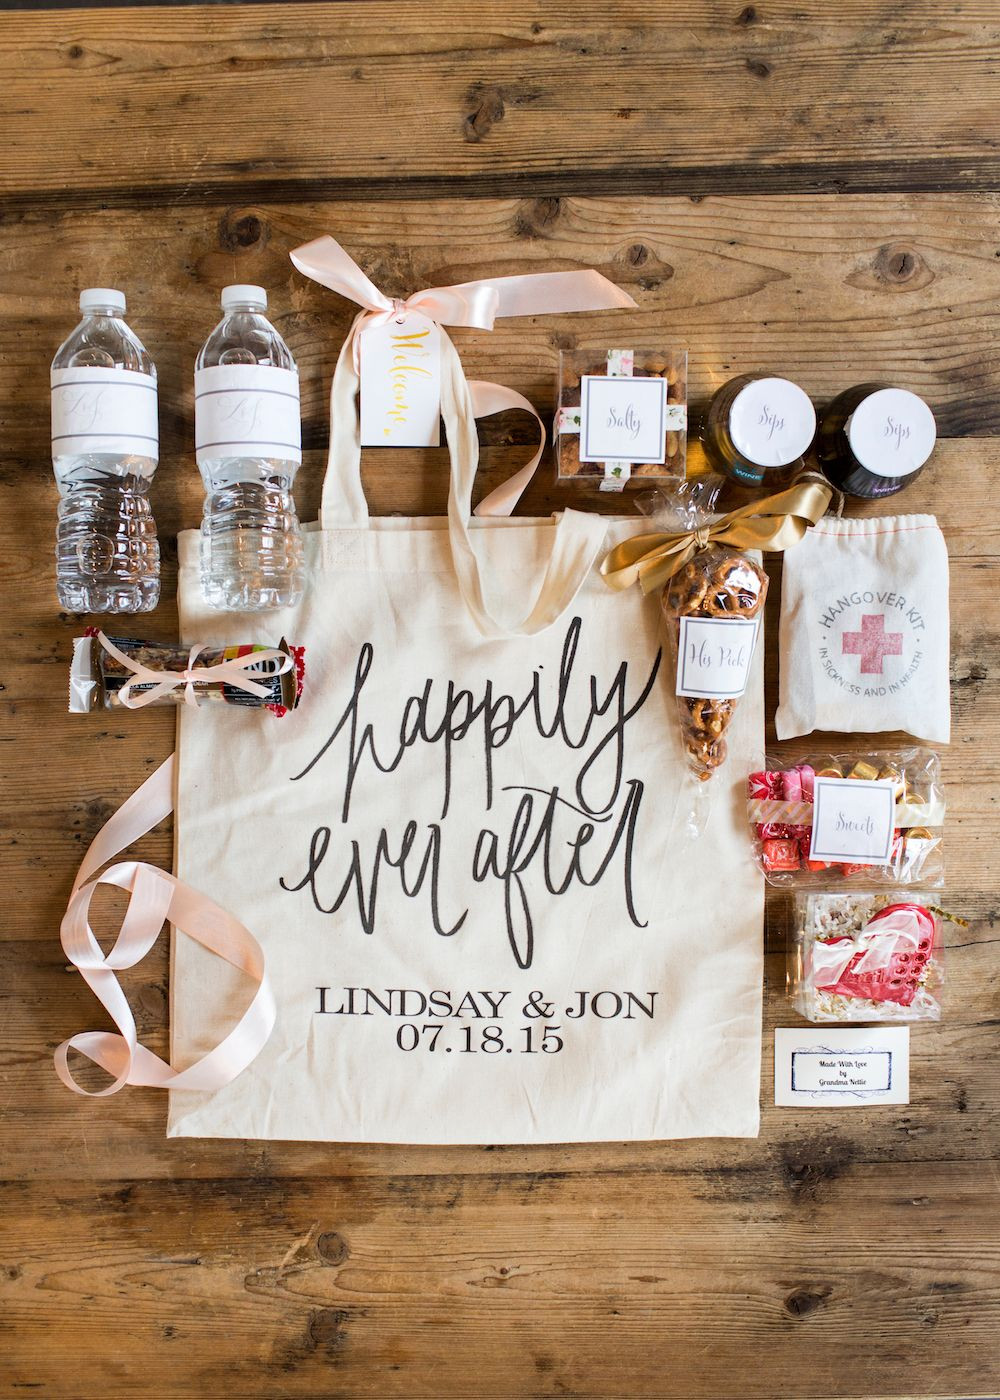 Engagement Party Gift Ideas For Guests
 Wedding Wednesday What We Put in Our Wedding Wel e Bags